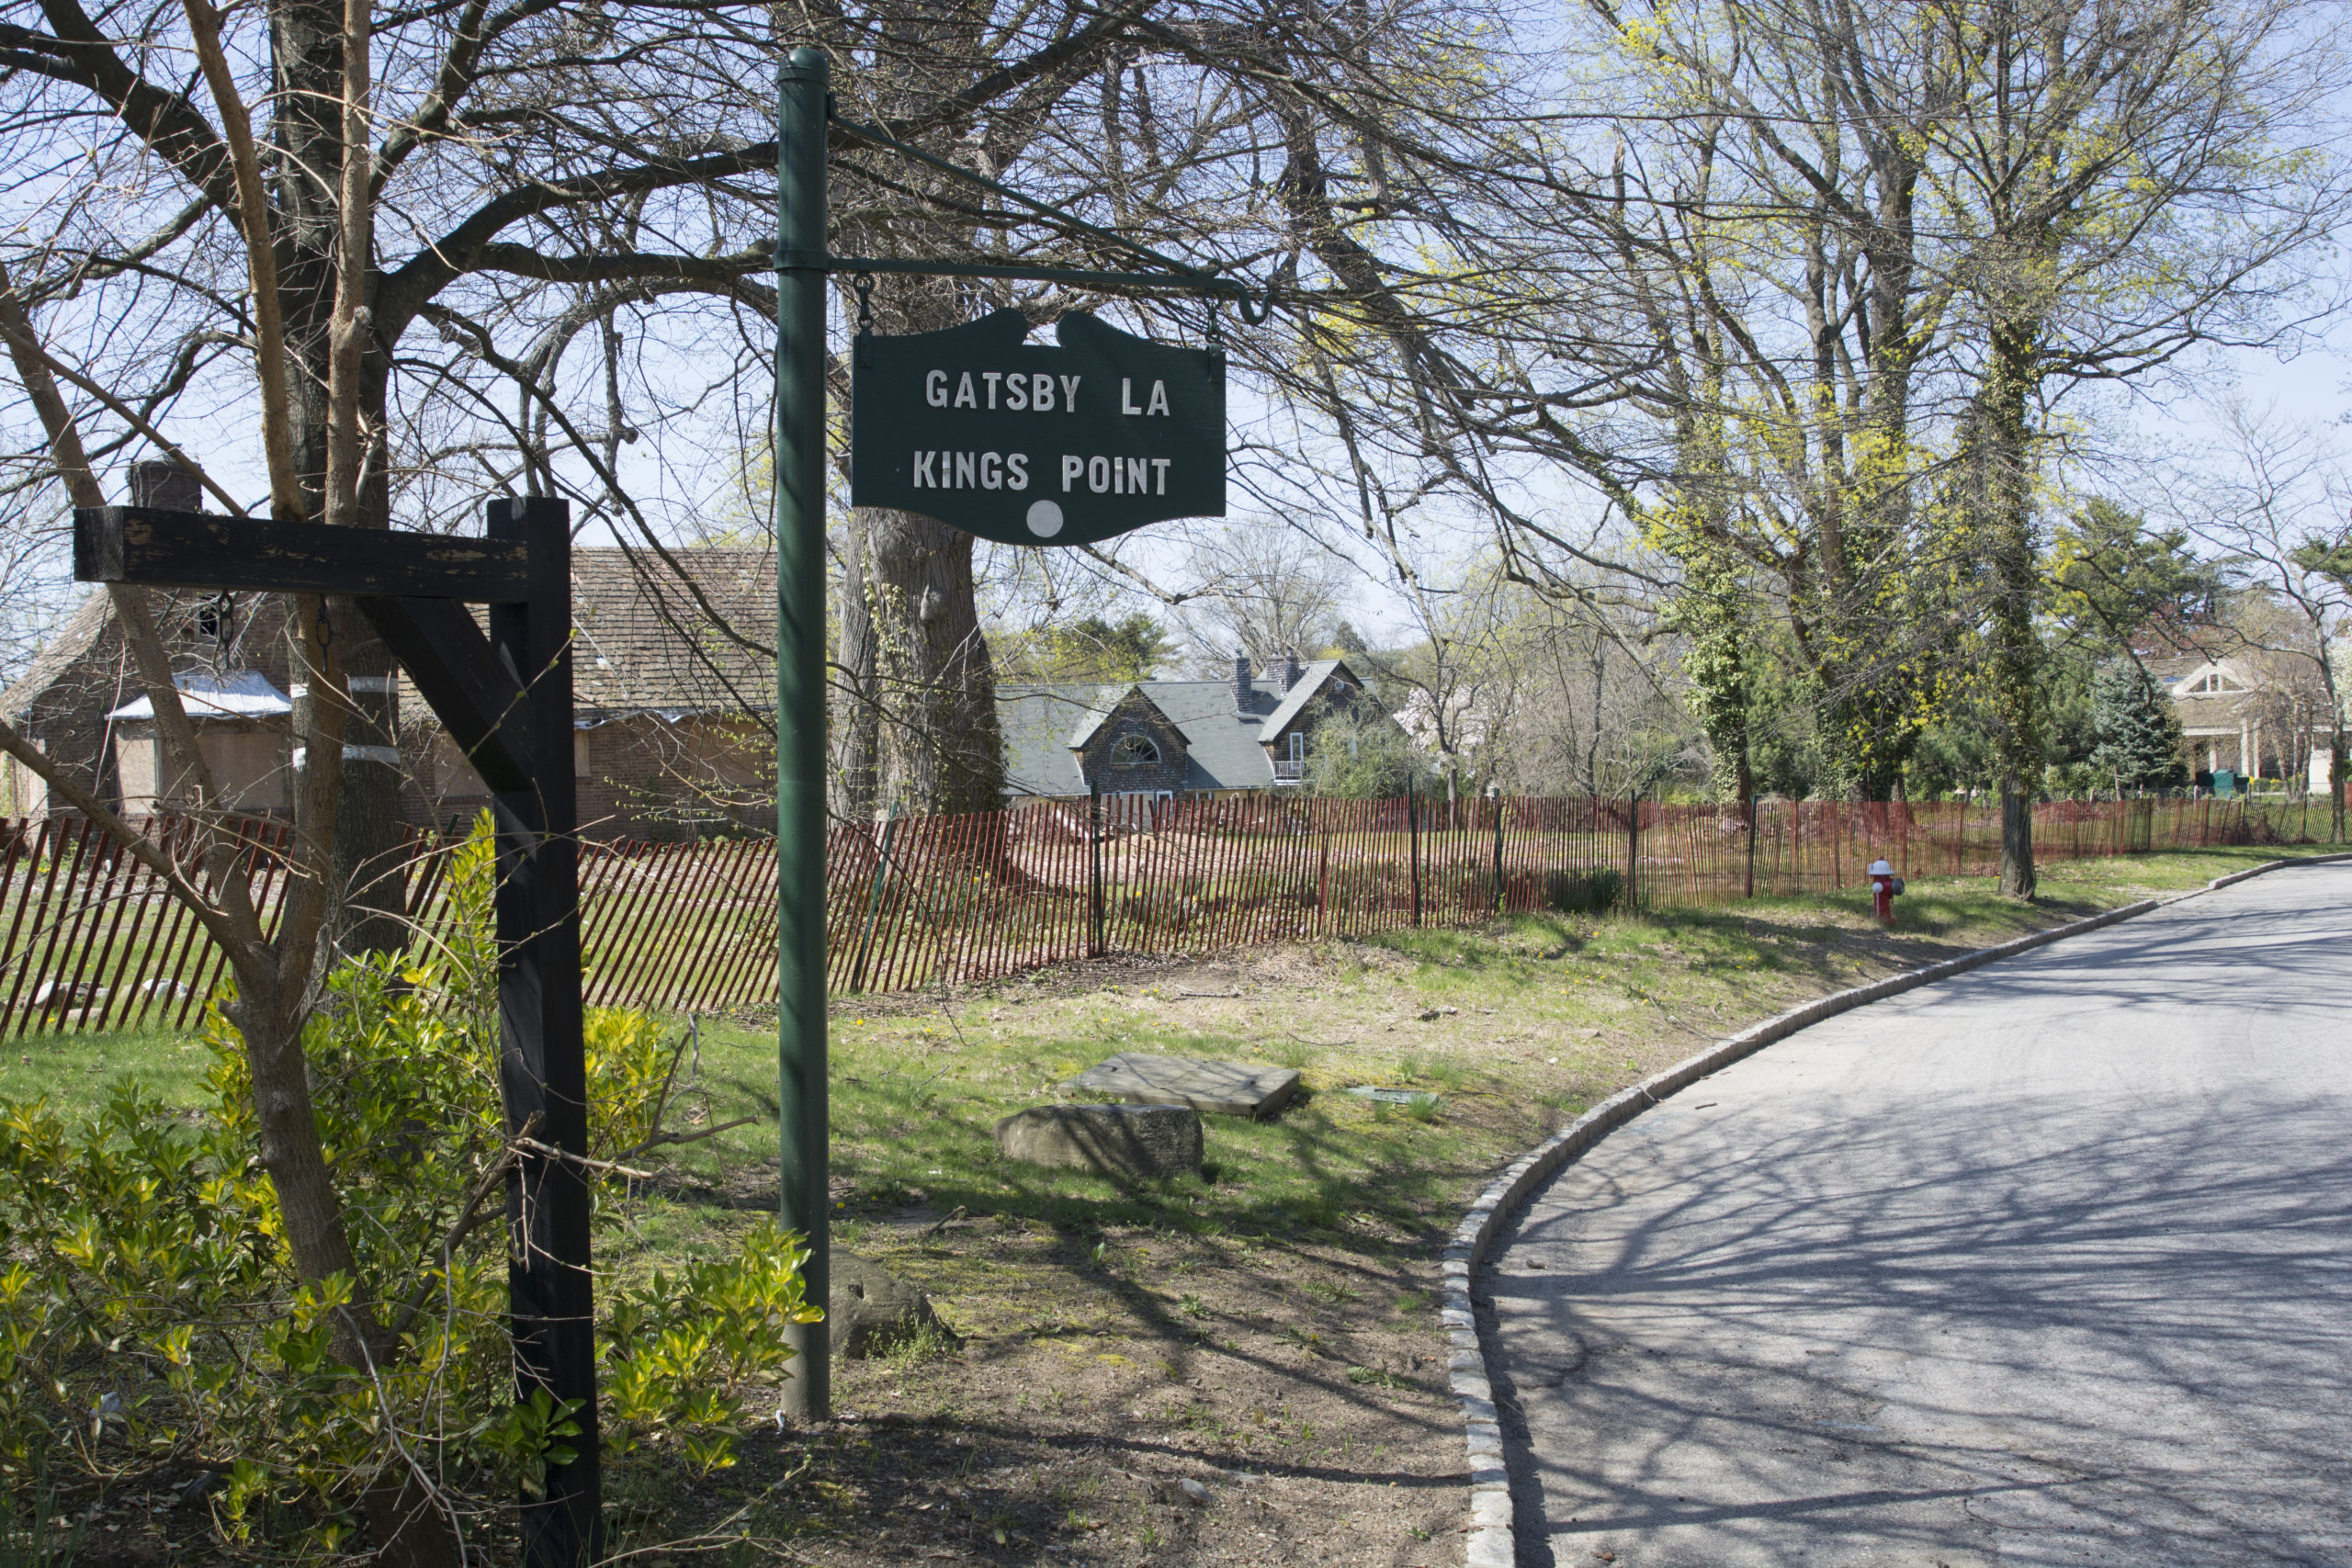 The Brickman Estate, located on the corner of Kings Point Road and Gatsby Lane, is gated off from public entry. (Photo by Janelle Clausen)